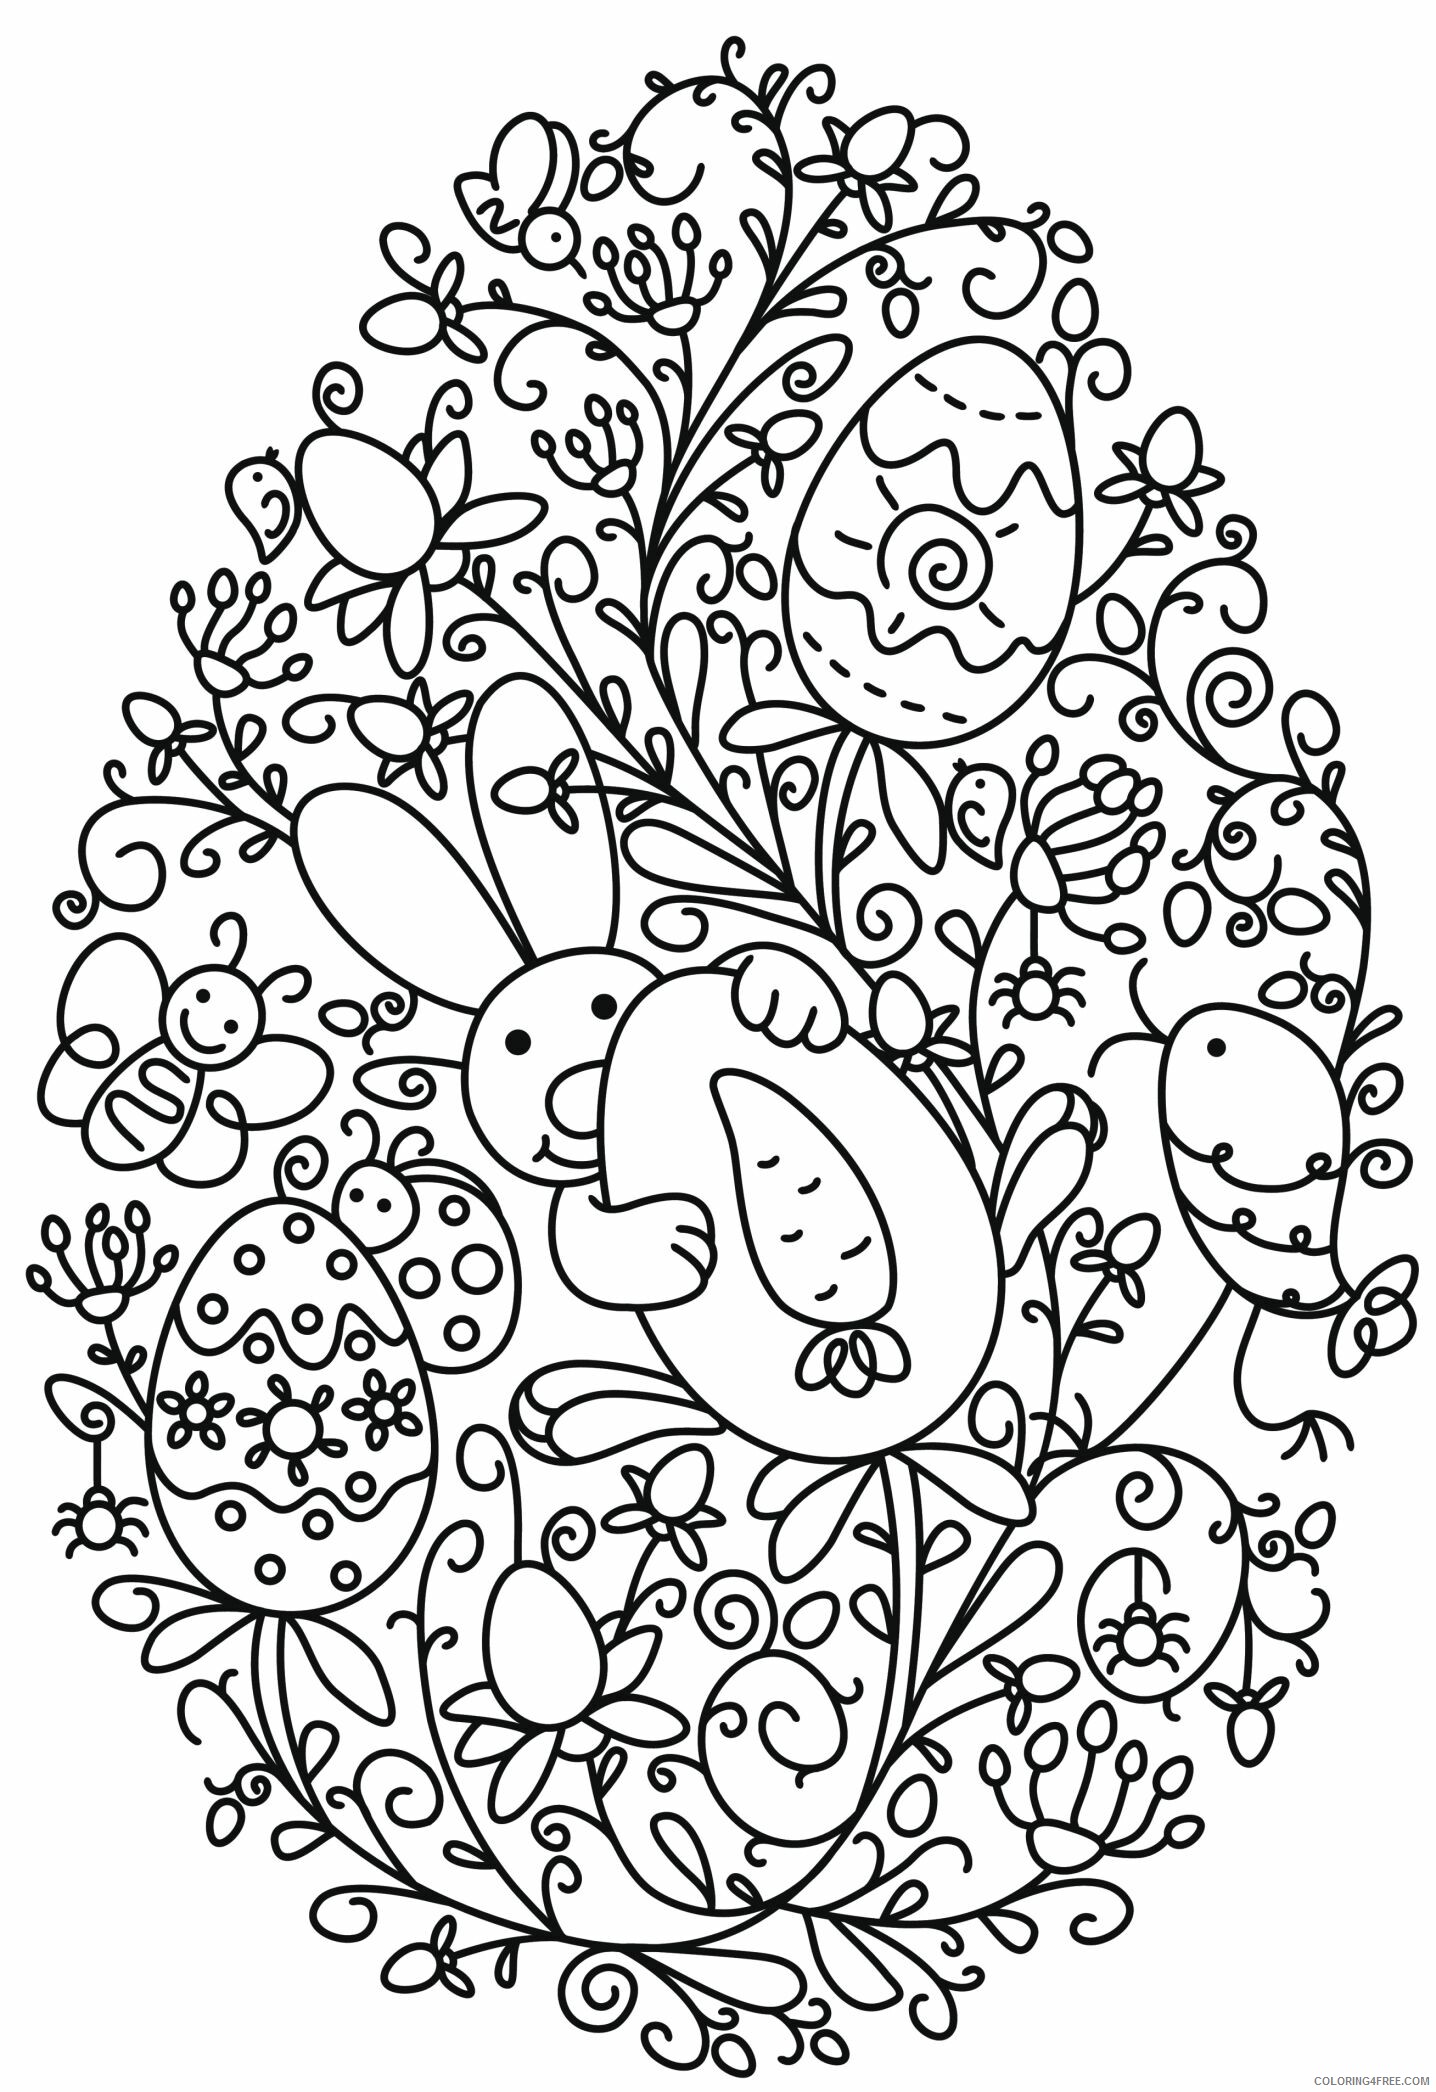 Easter Egg Coloring Pages Holiday Cute Patterned Easter Egg Printable 2021 0471 Coloring4free